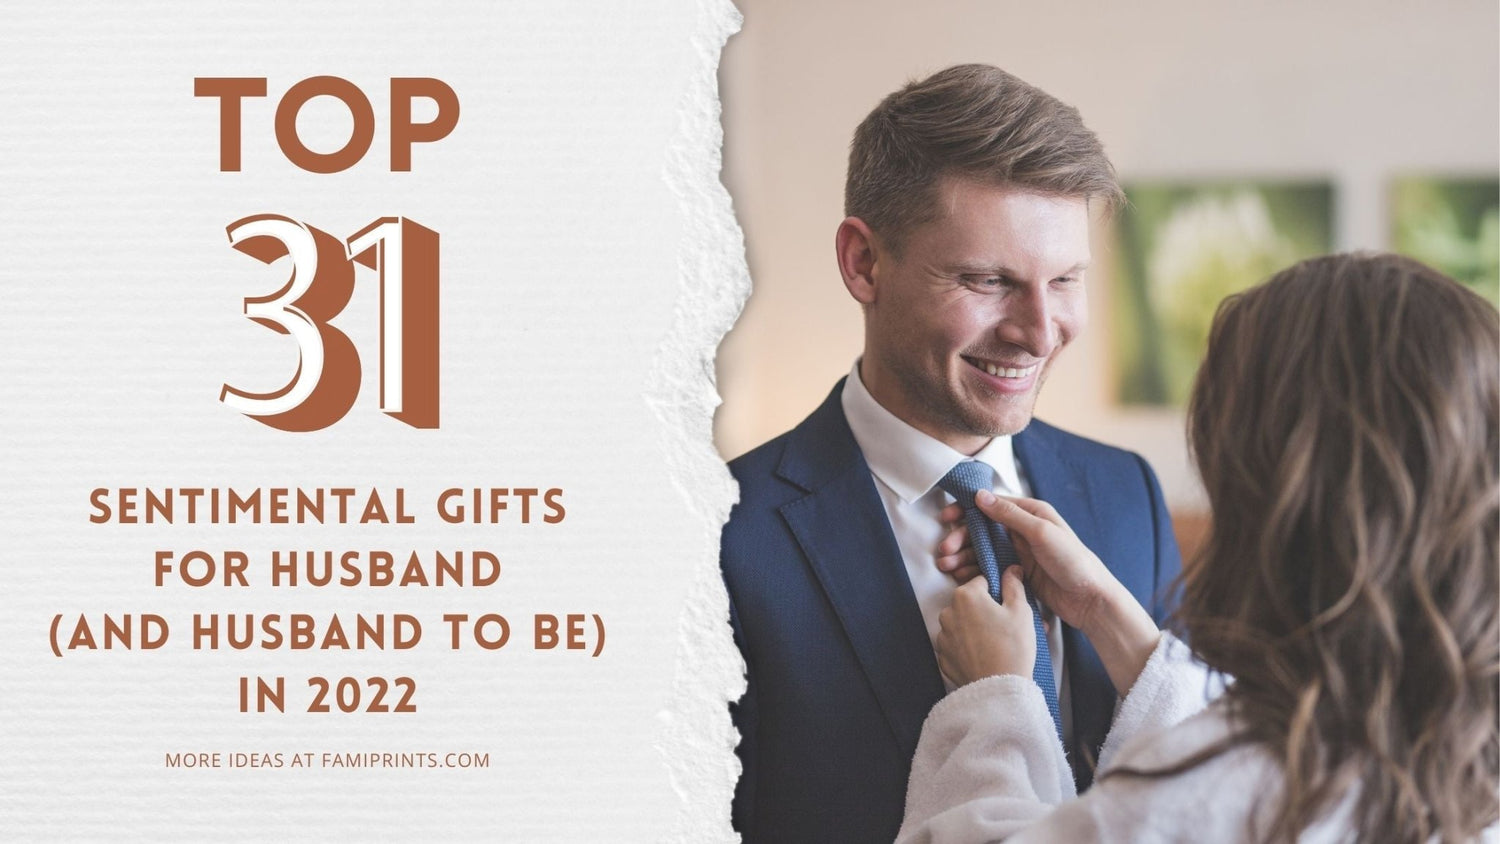 Top 31 Sentimental Gifts For Husband (and Husband To Be) In 2022 - FamiPrints | Trending Customizable Family Gifts